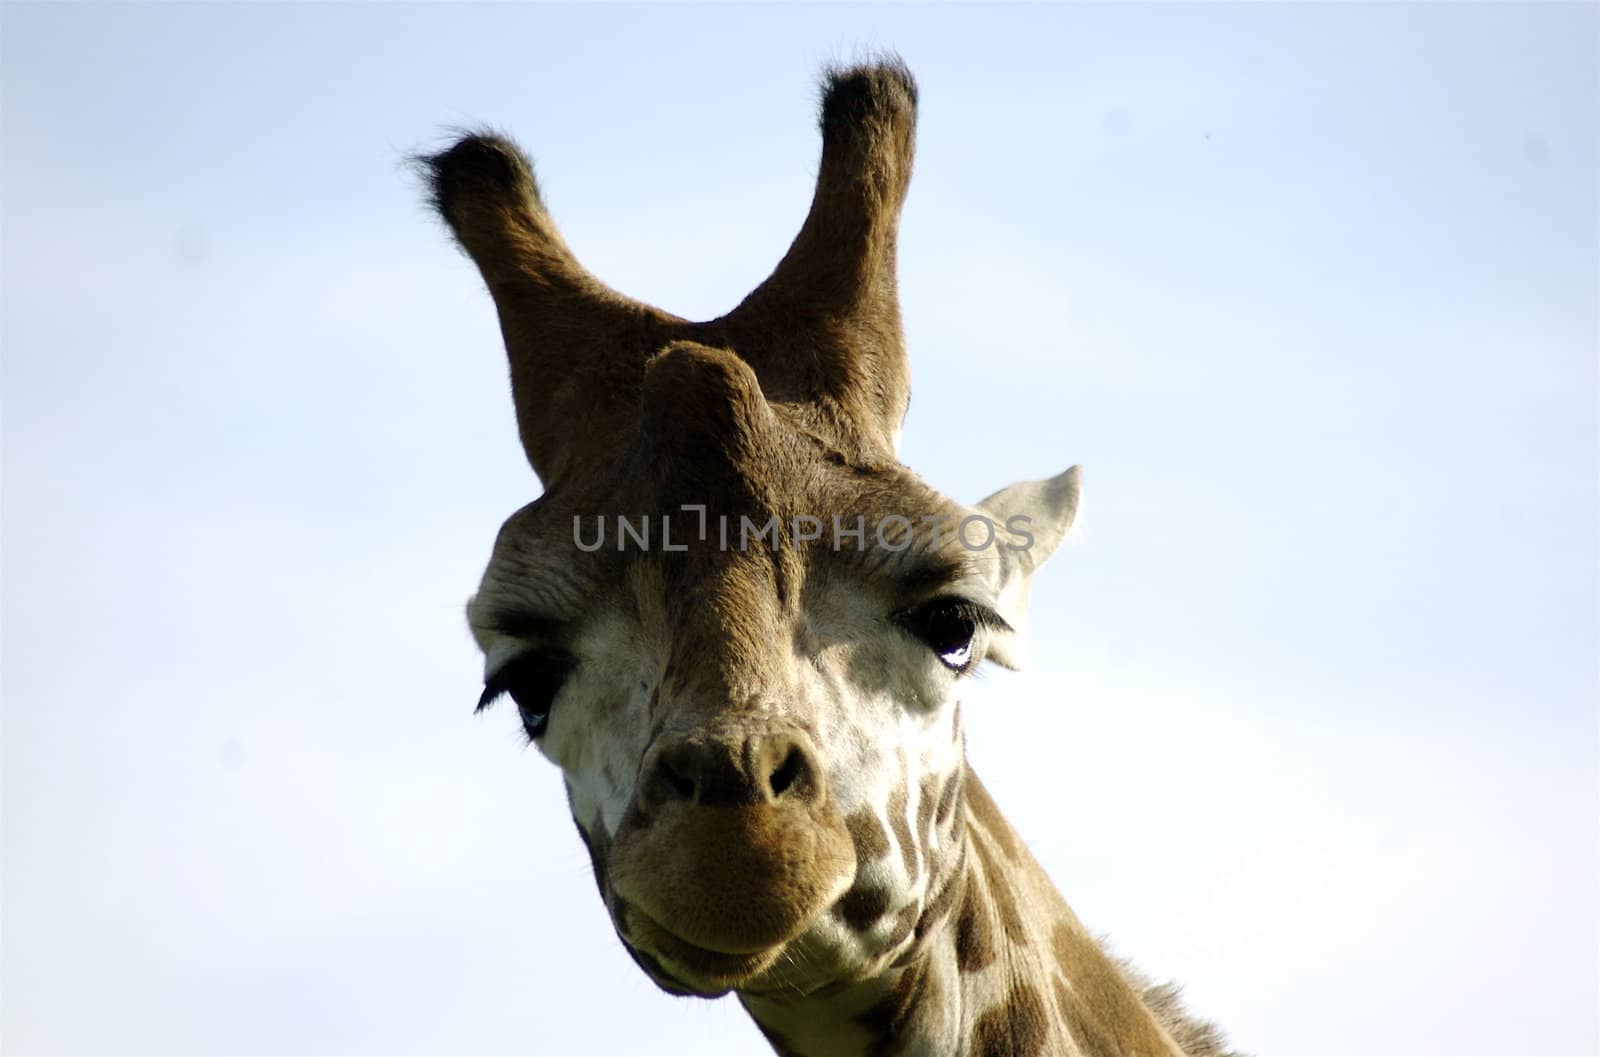 Close up of Giraffe's face against very pale sky. Horns, spots and eyelashes featured.  Giraffe is lookinh straight into the camera.